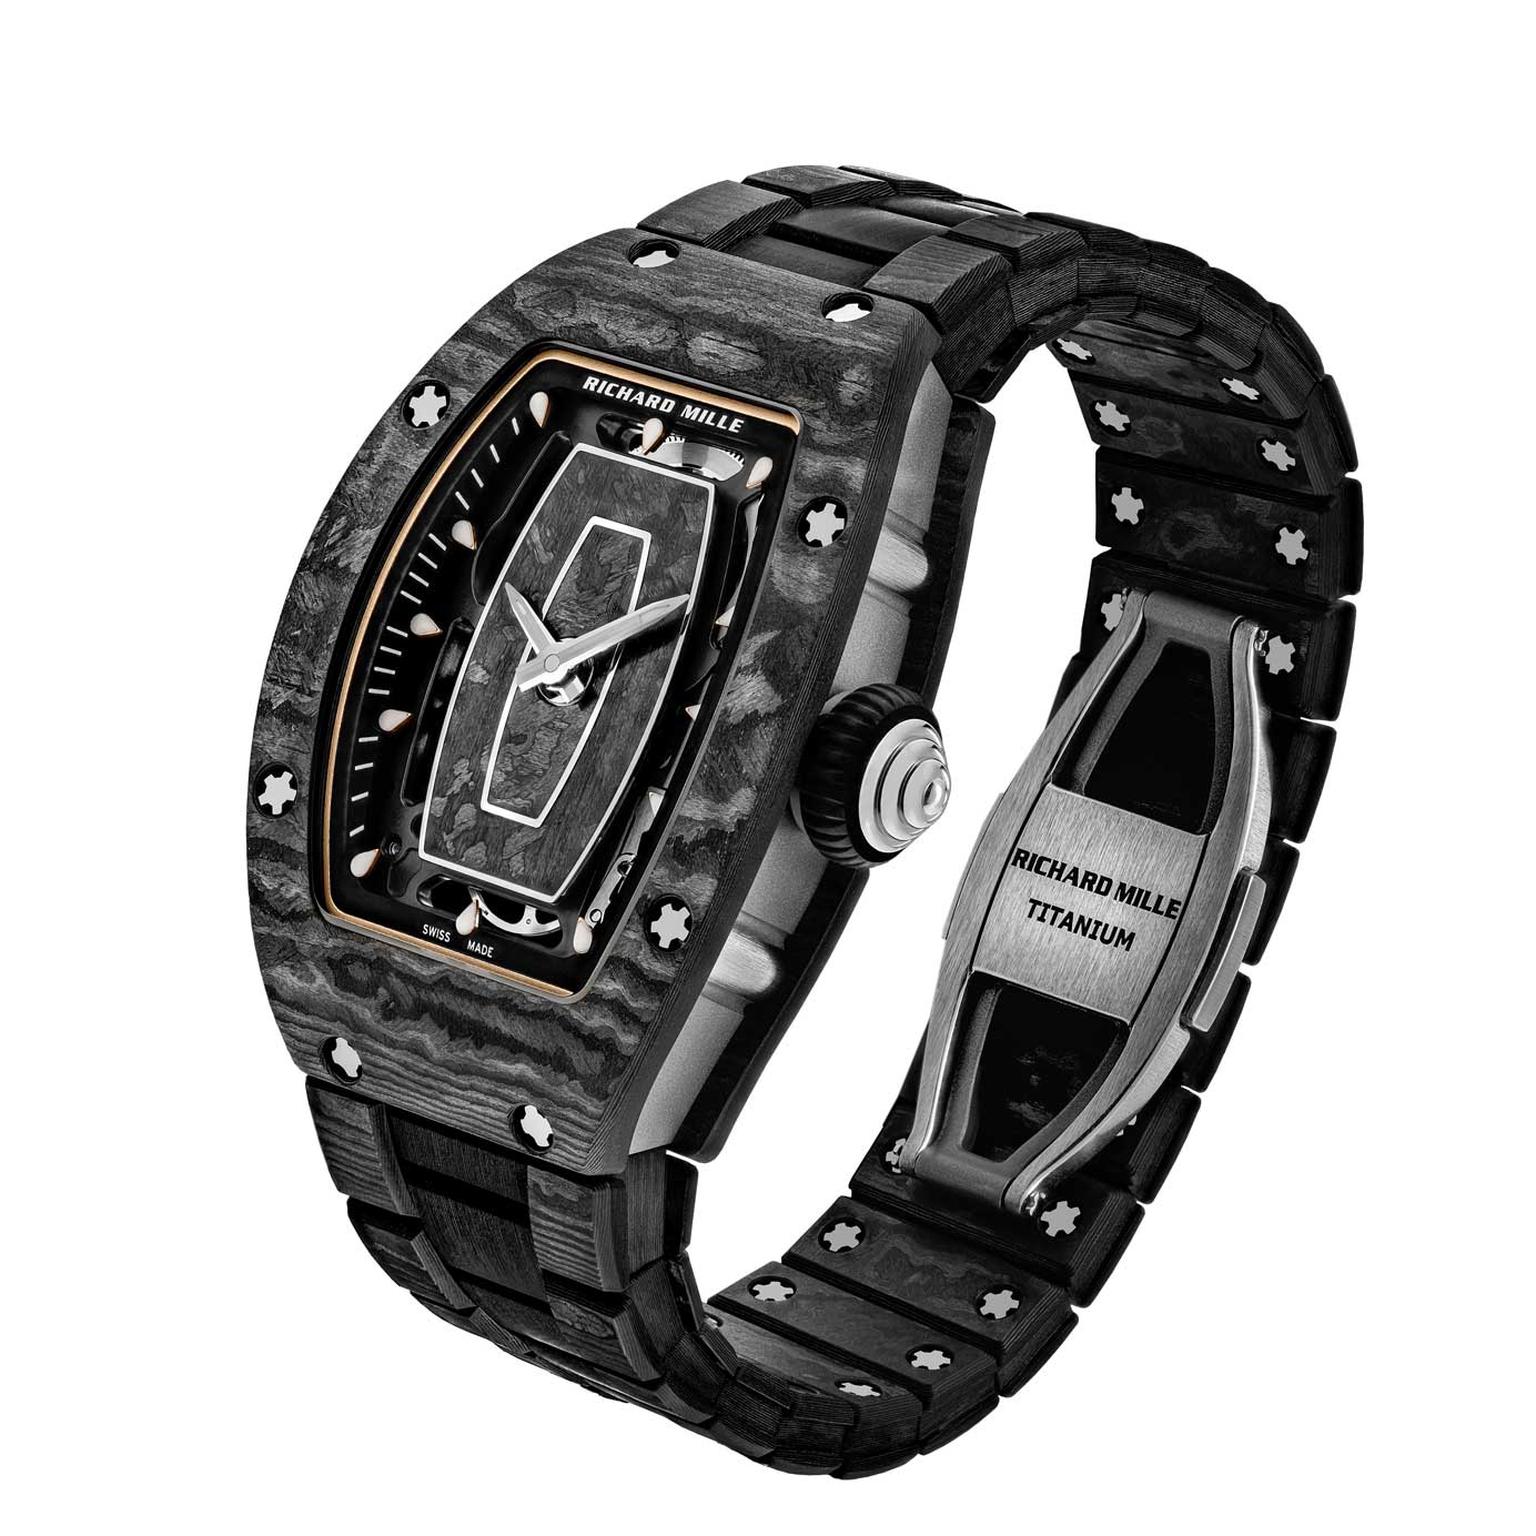 Richard Mille RM07 01 in carbon TPT